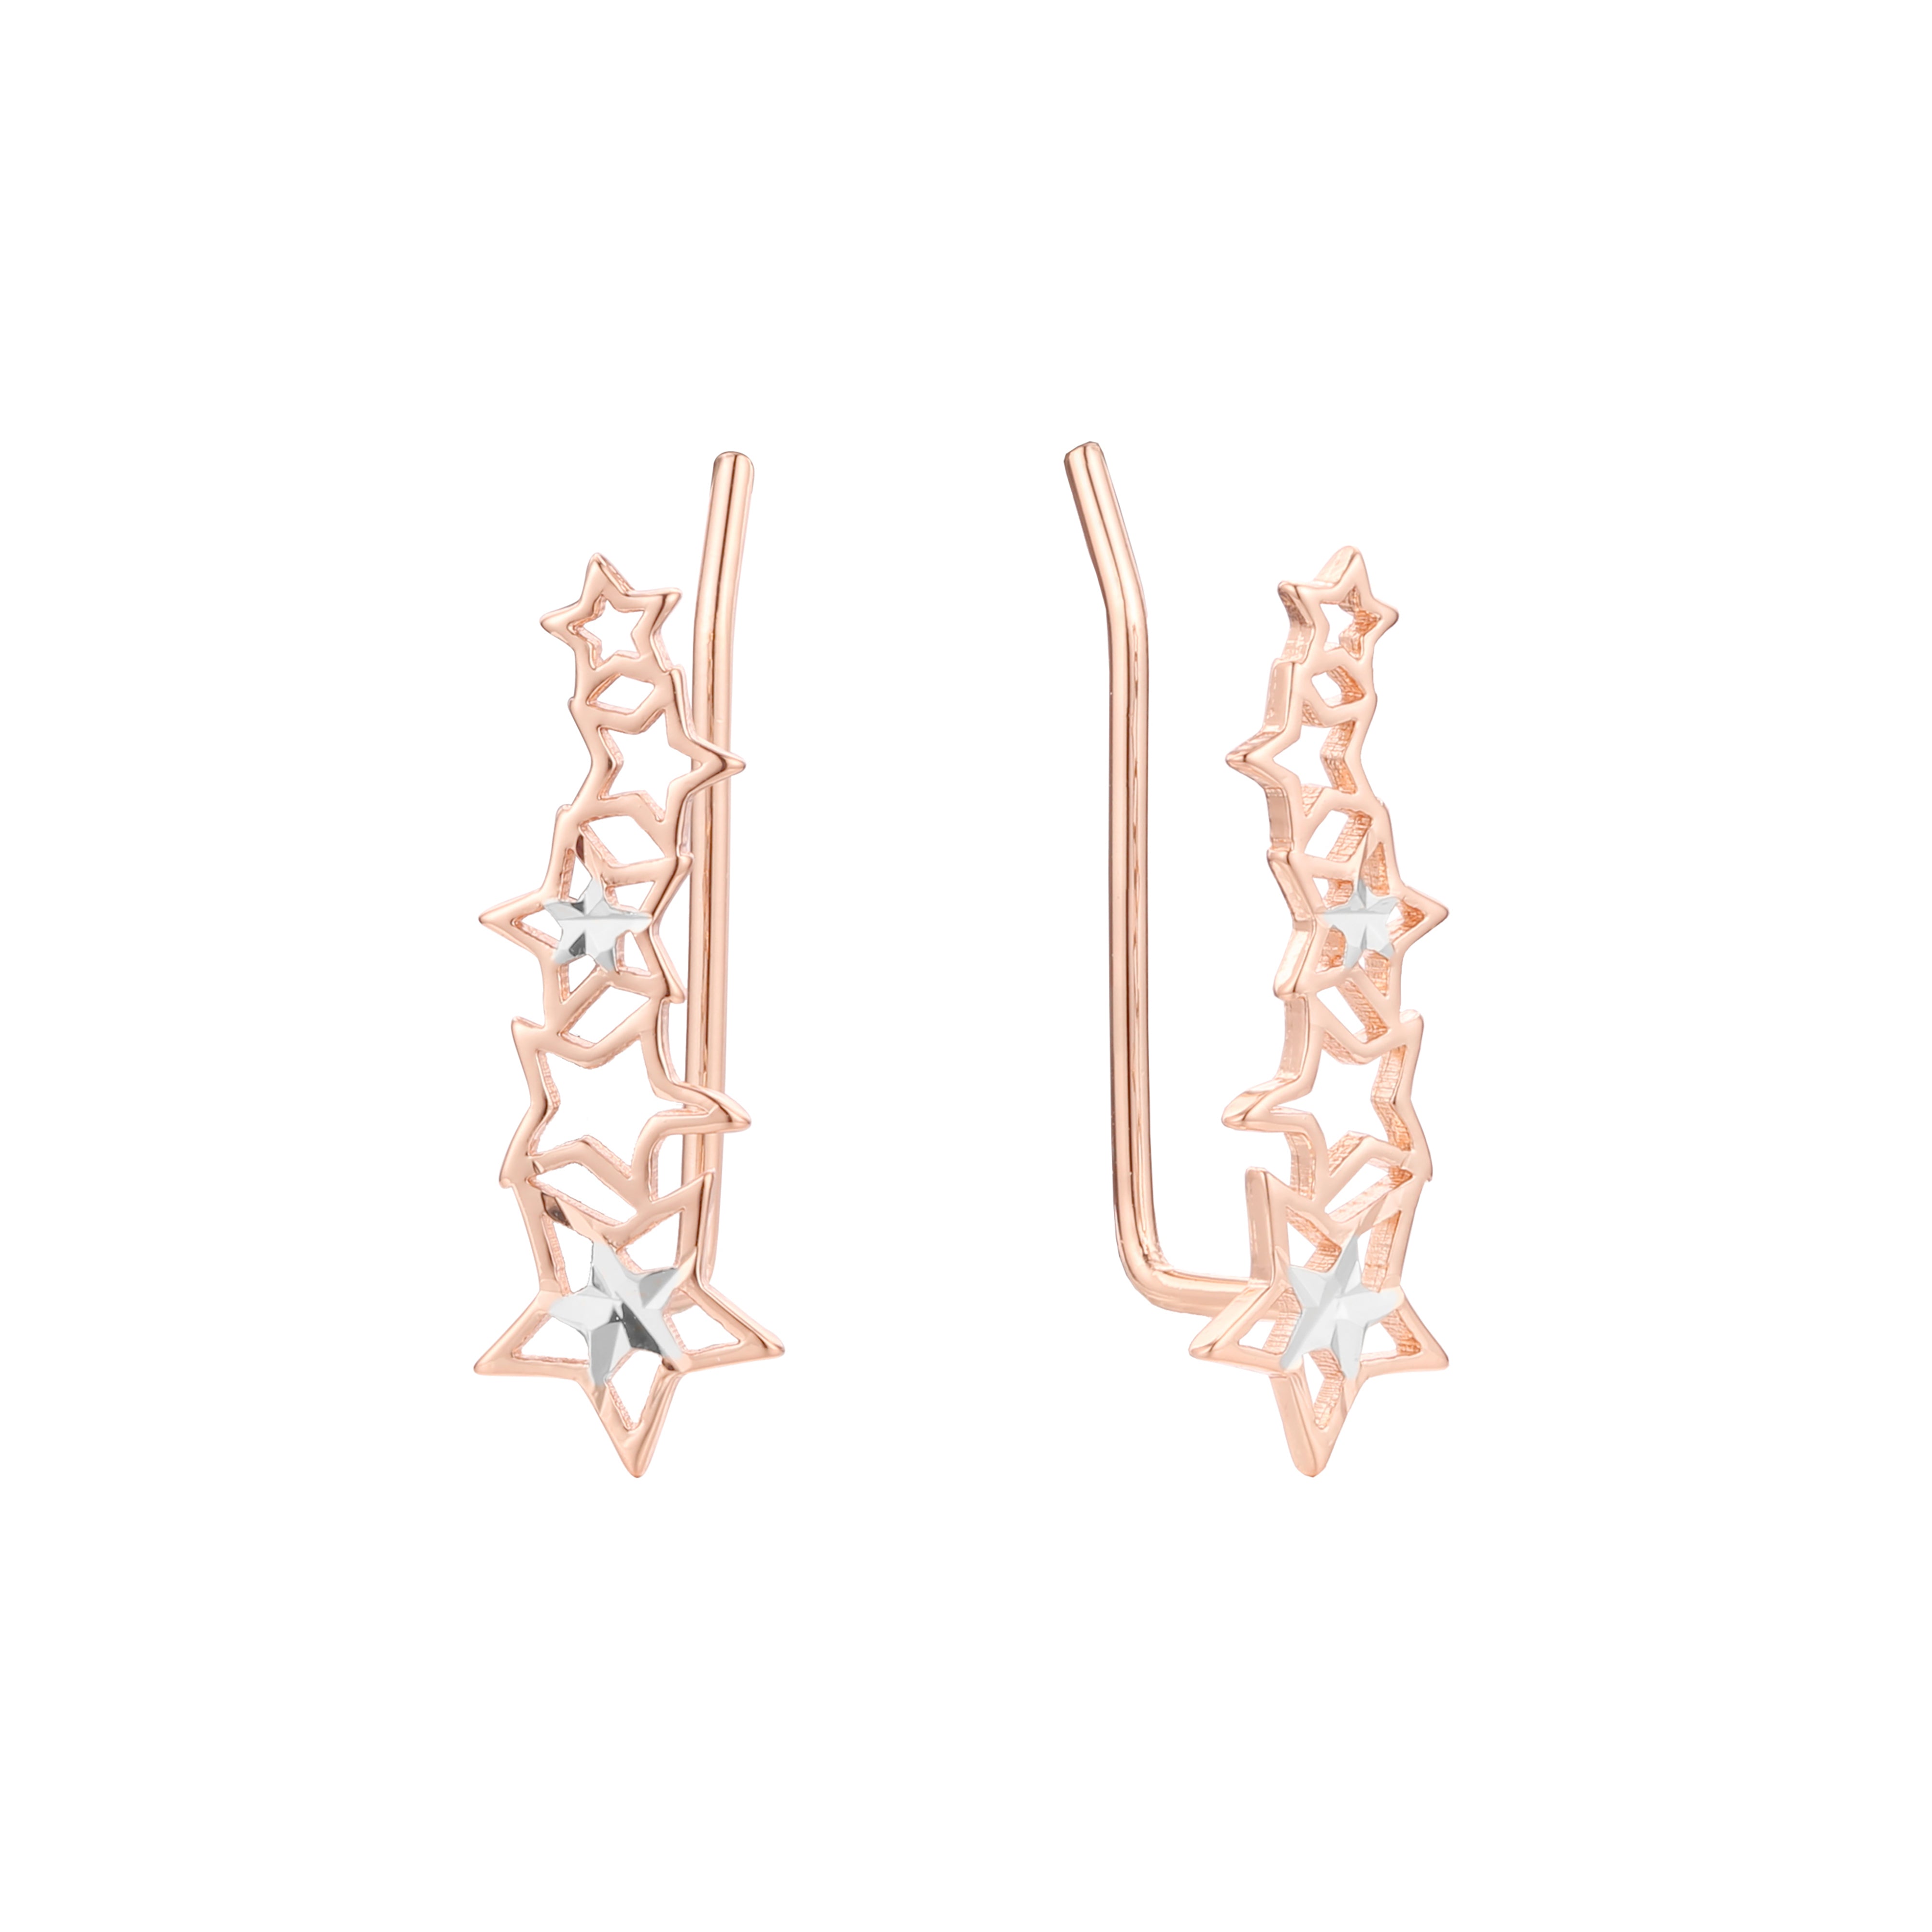 Stars crawler earrings in 14K Gold, Rose Gold, two tone plating colors